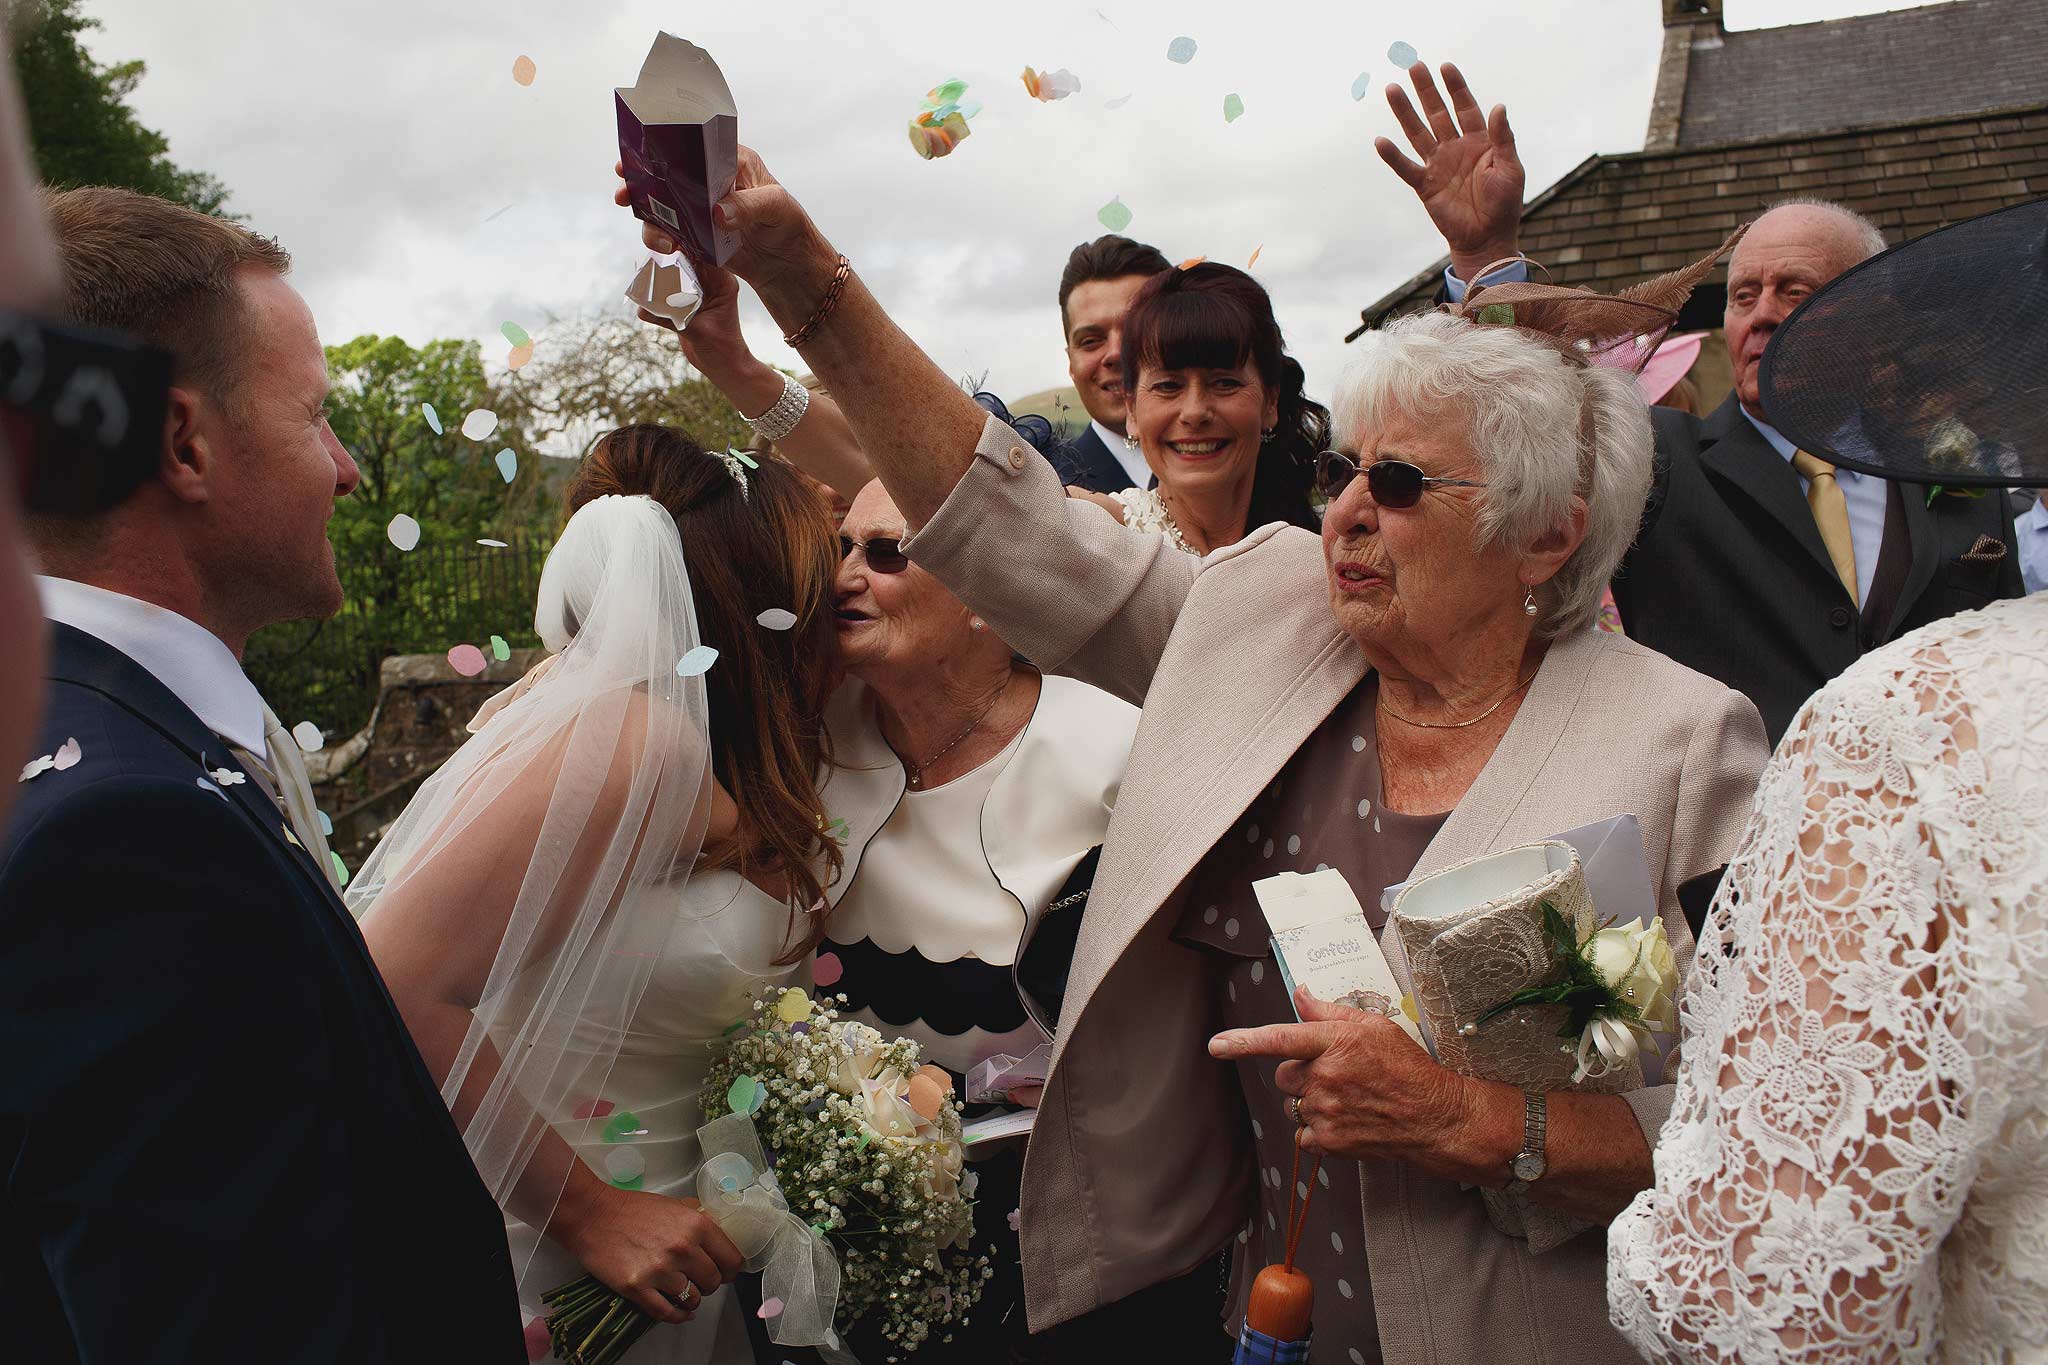 Confetti being thrown at a wedding at the inn at whitewell